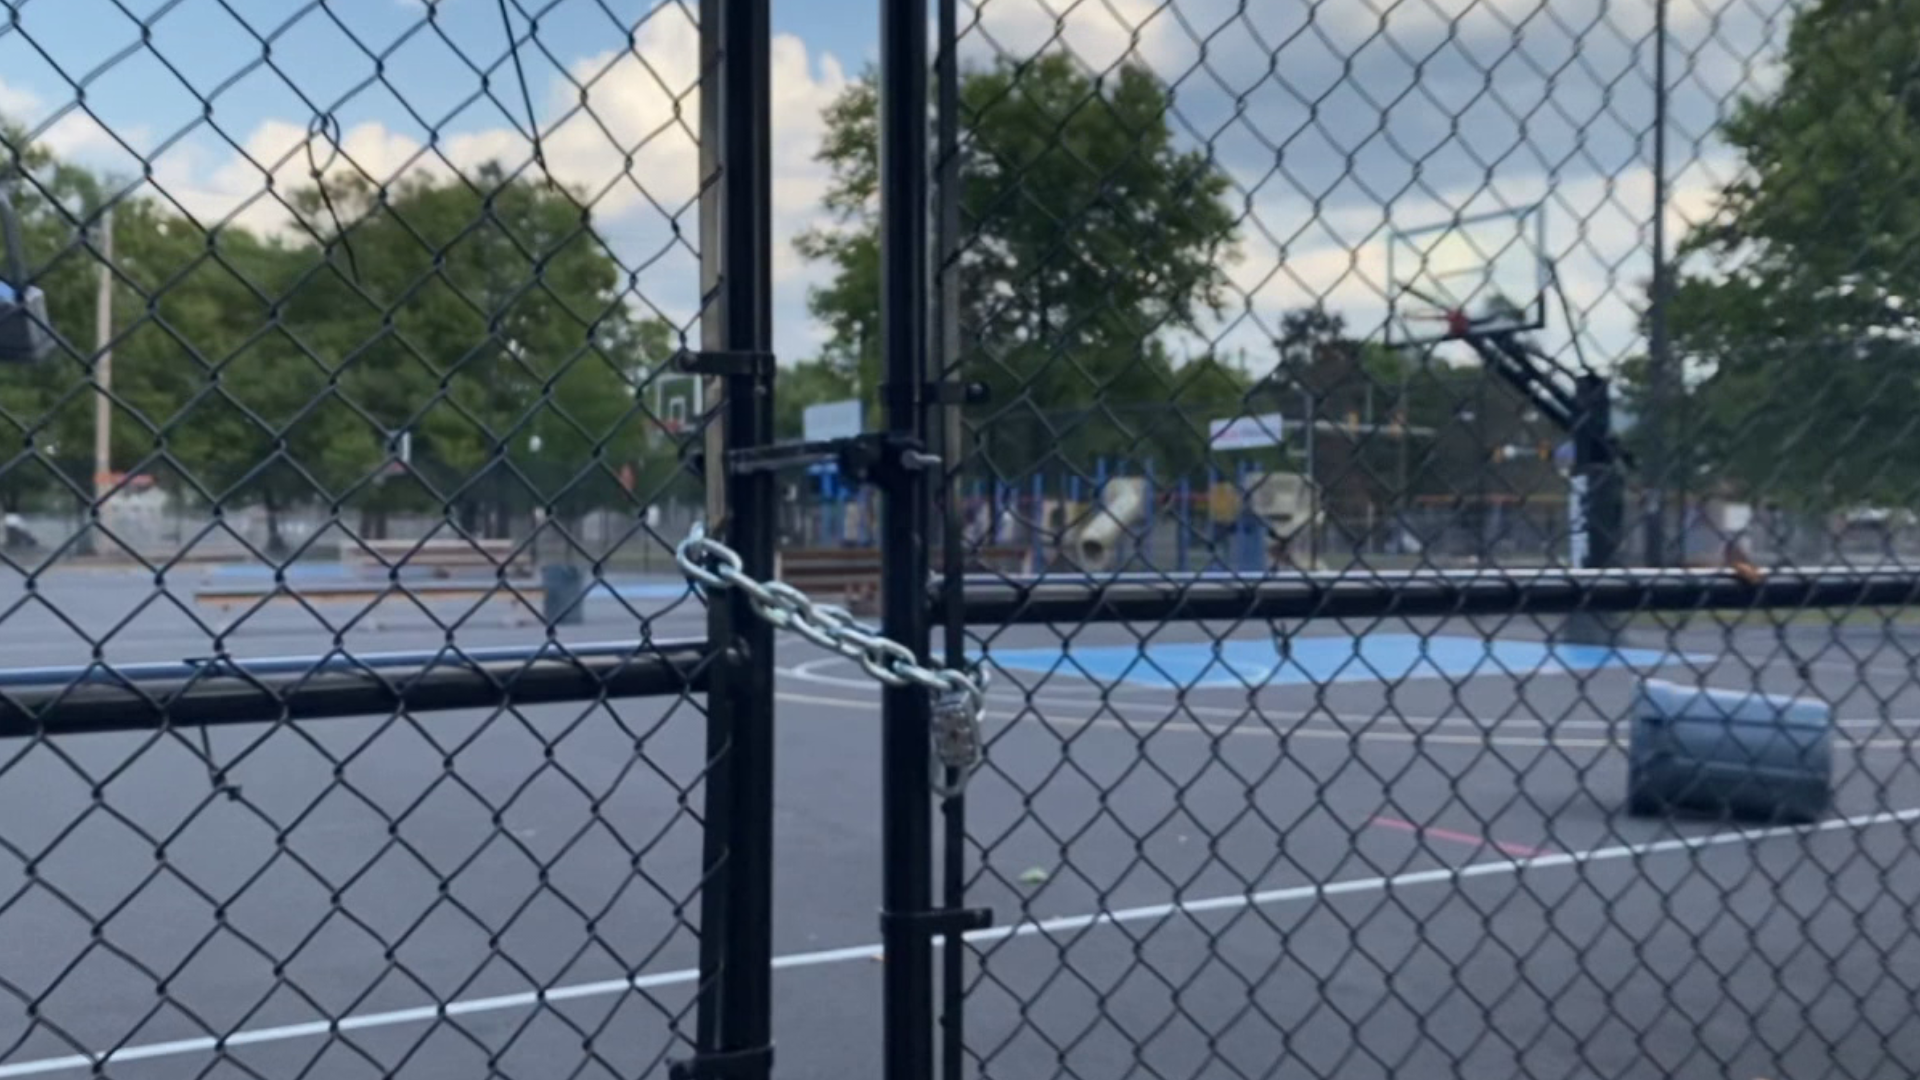 Community upset over closing of basketball courts, but understand the need for more security.